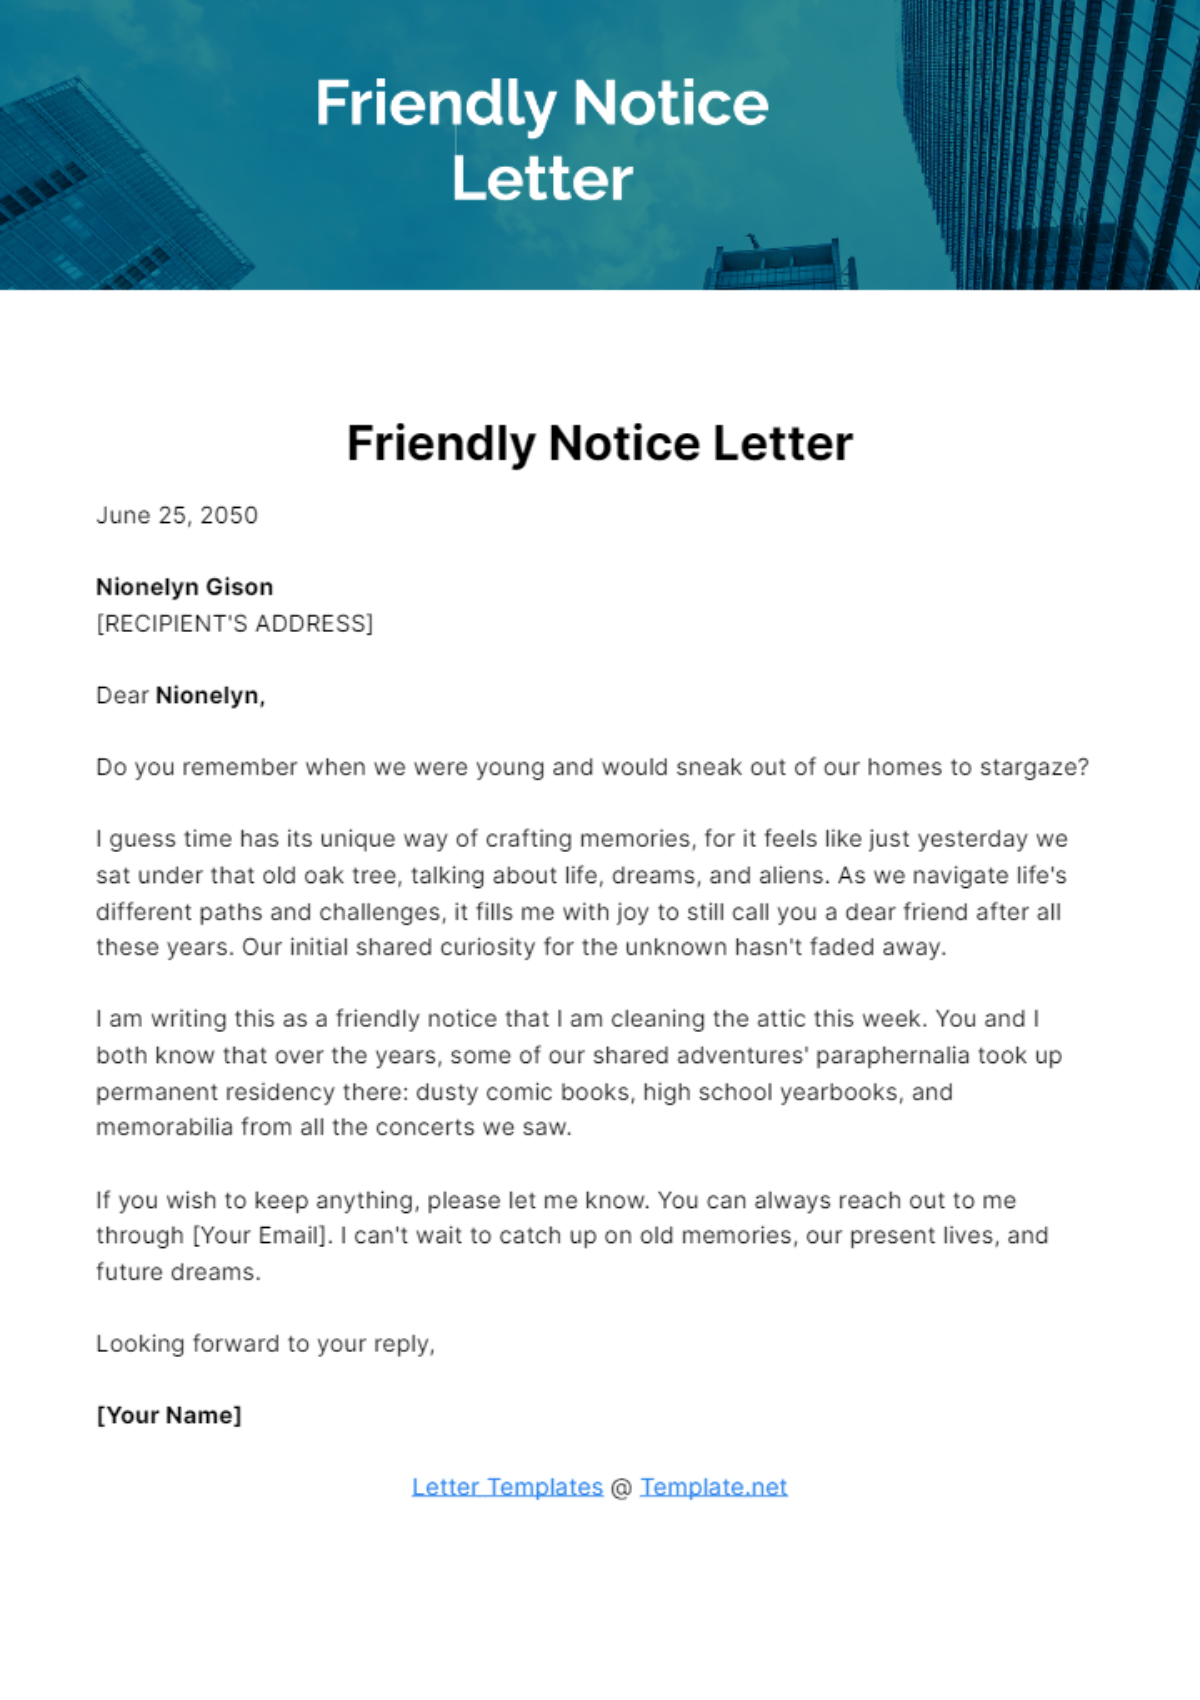 Friendly Notice Letter Template